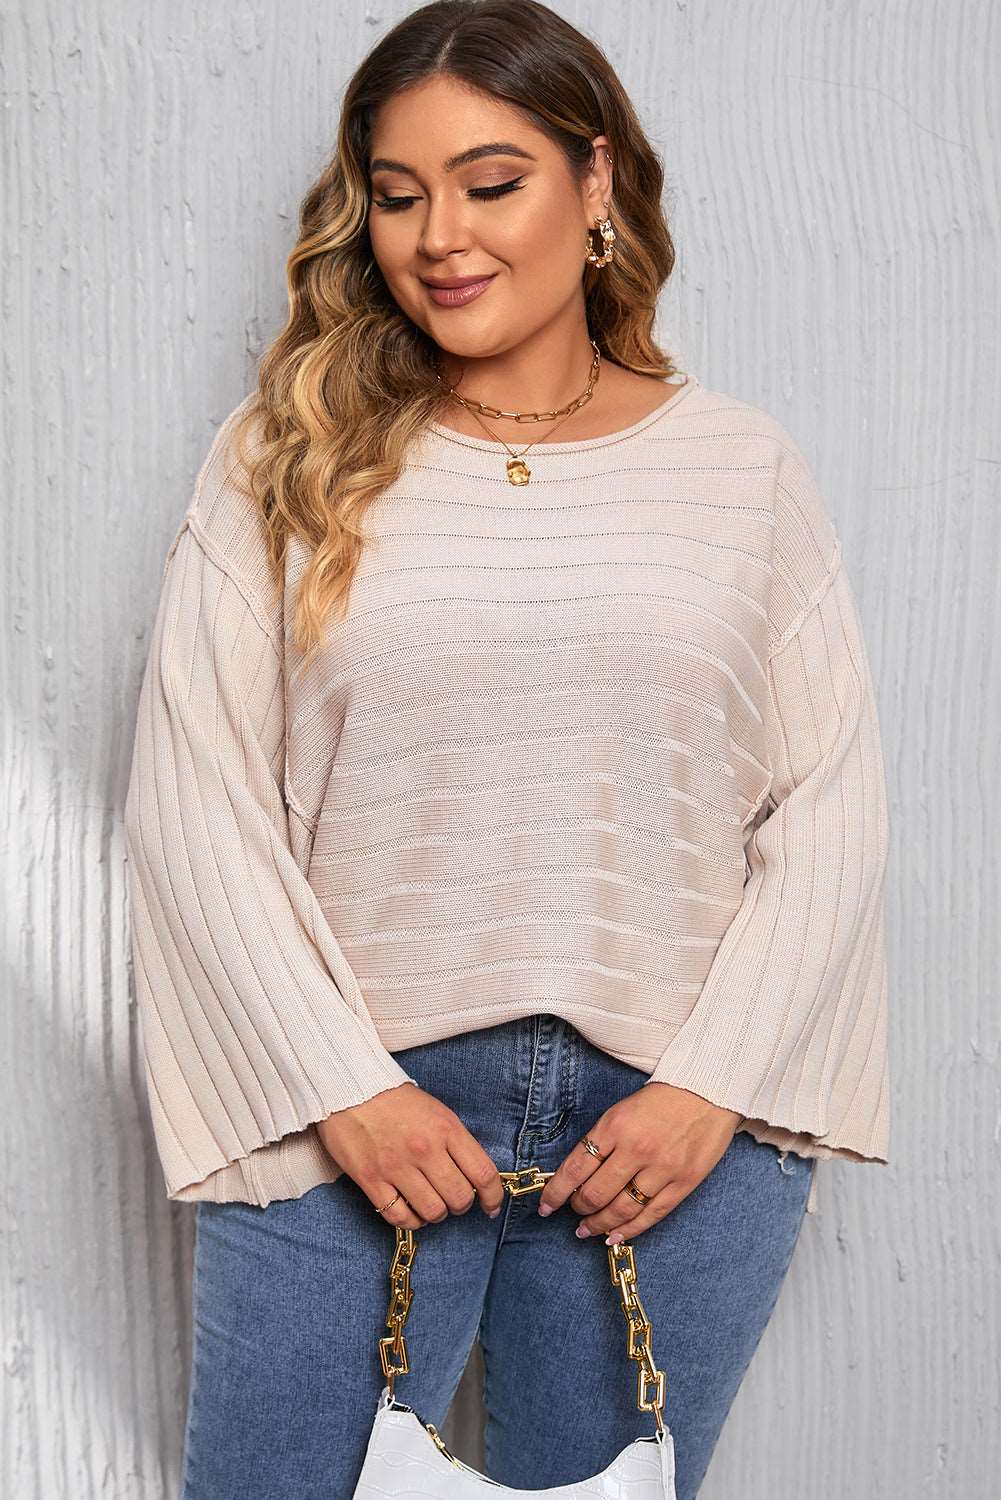 Apricot Plus Size Exposed Seam Bracelet Sleeve Ribbed Top - Bellisima Clothing Collective